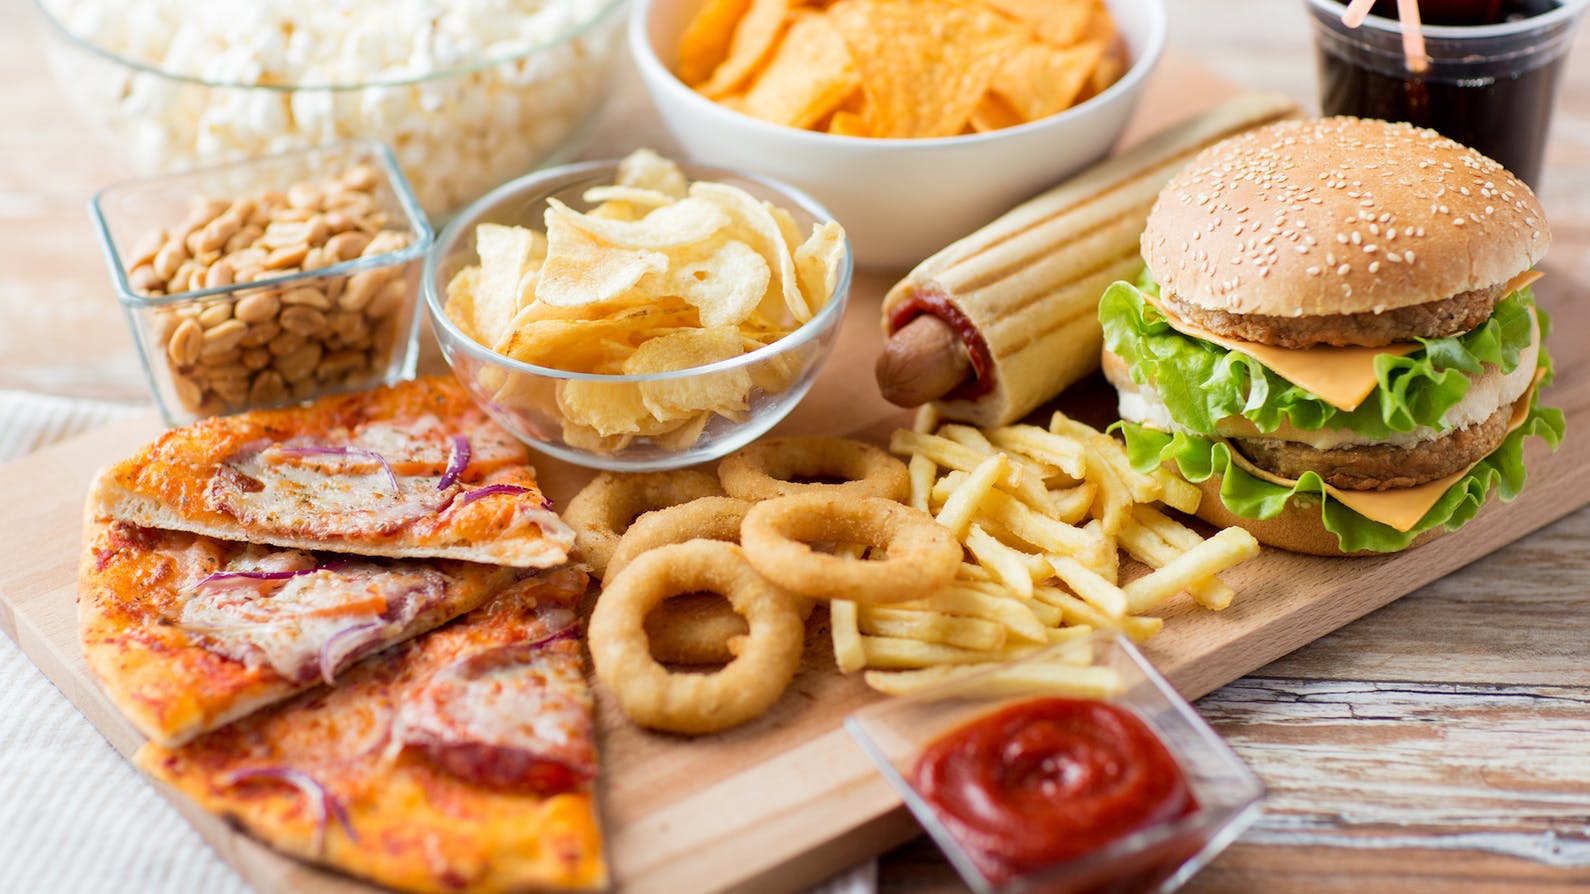 A selection of fast food